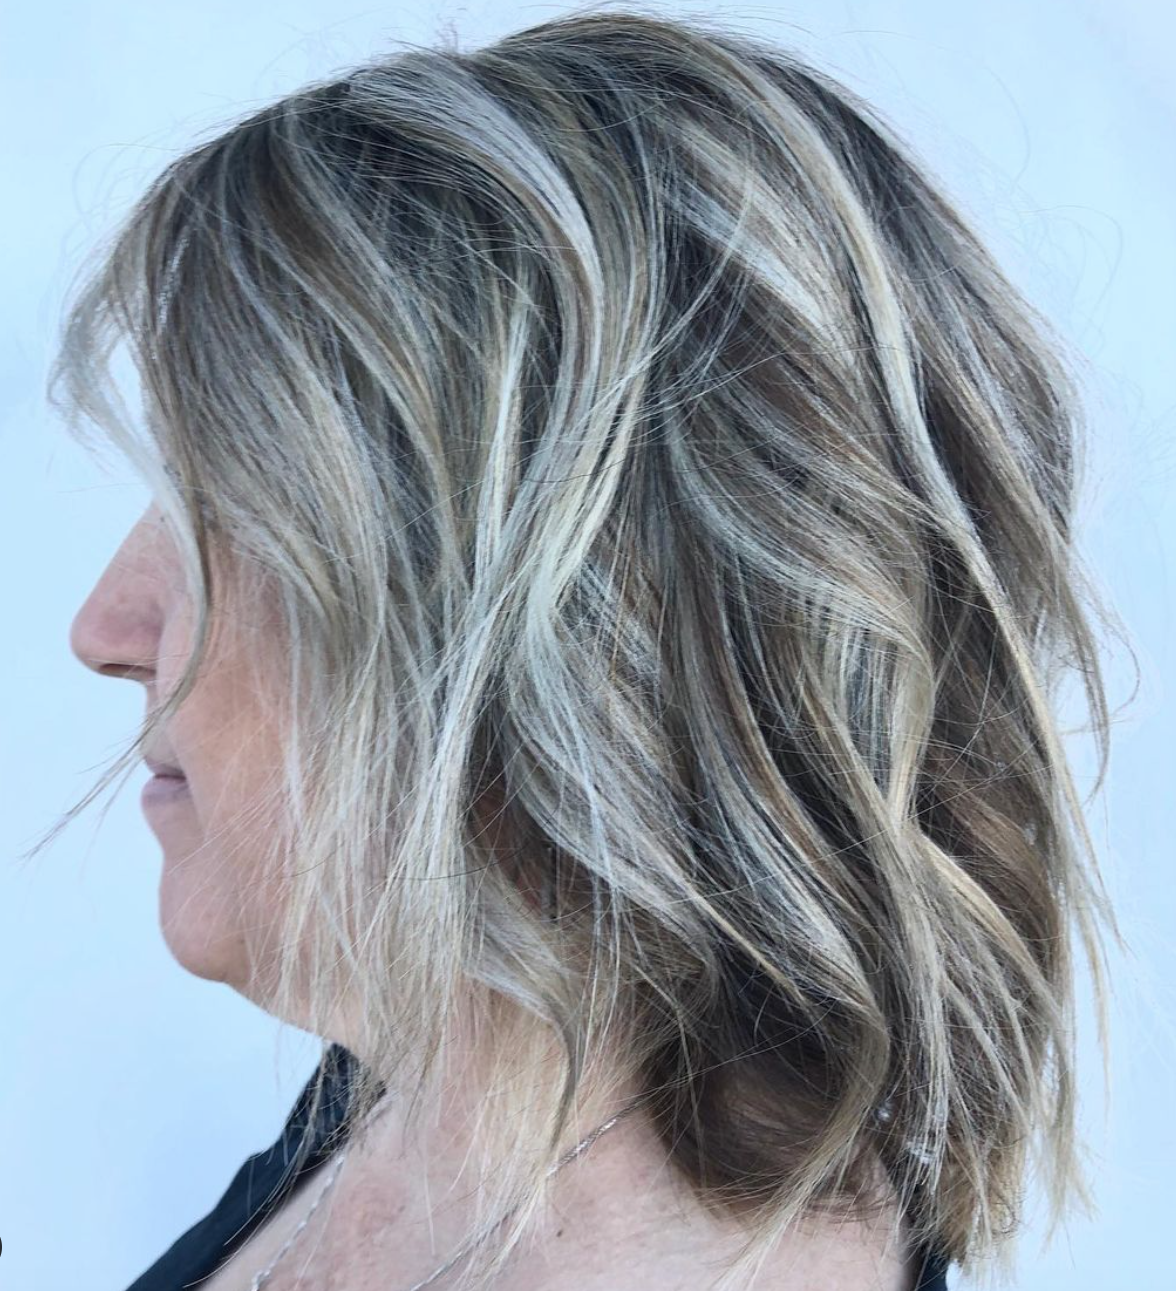 The side profile of a woman with a layered haircut.